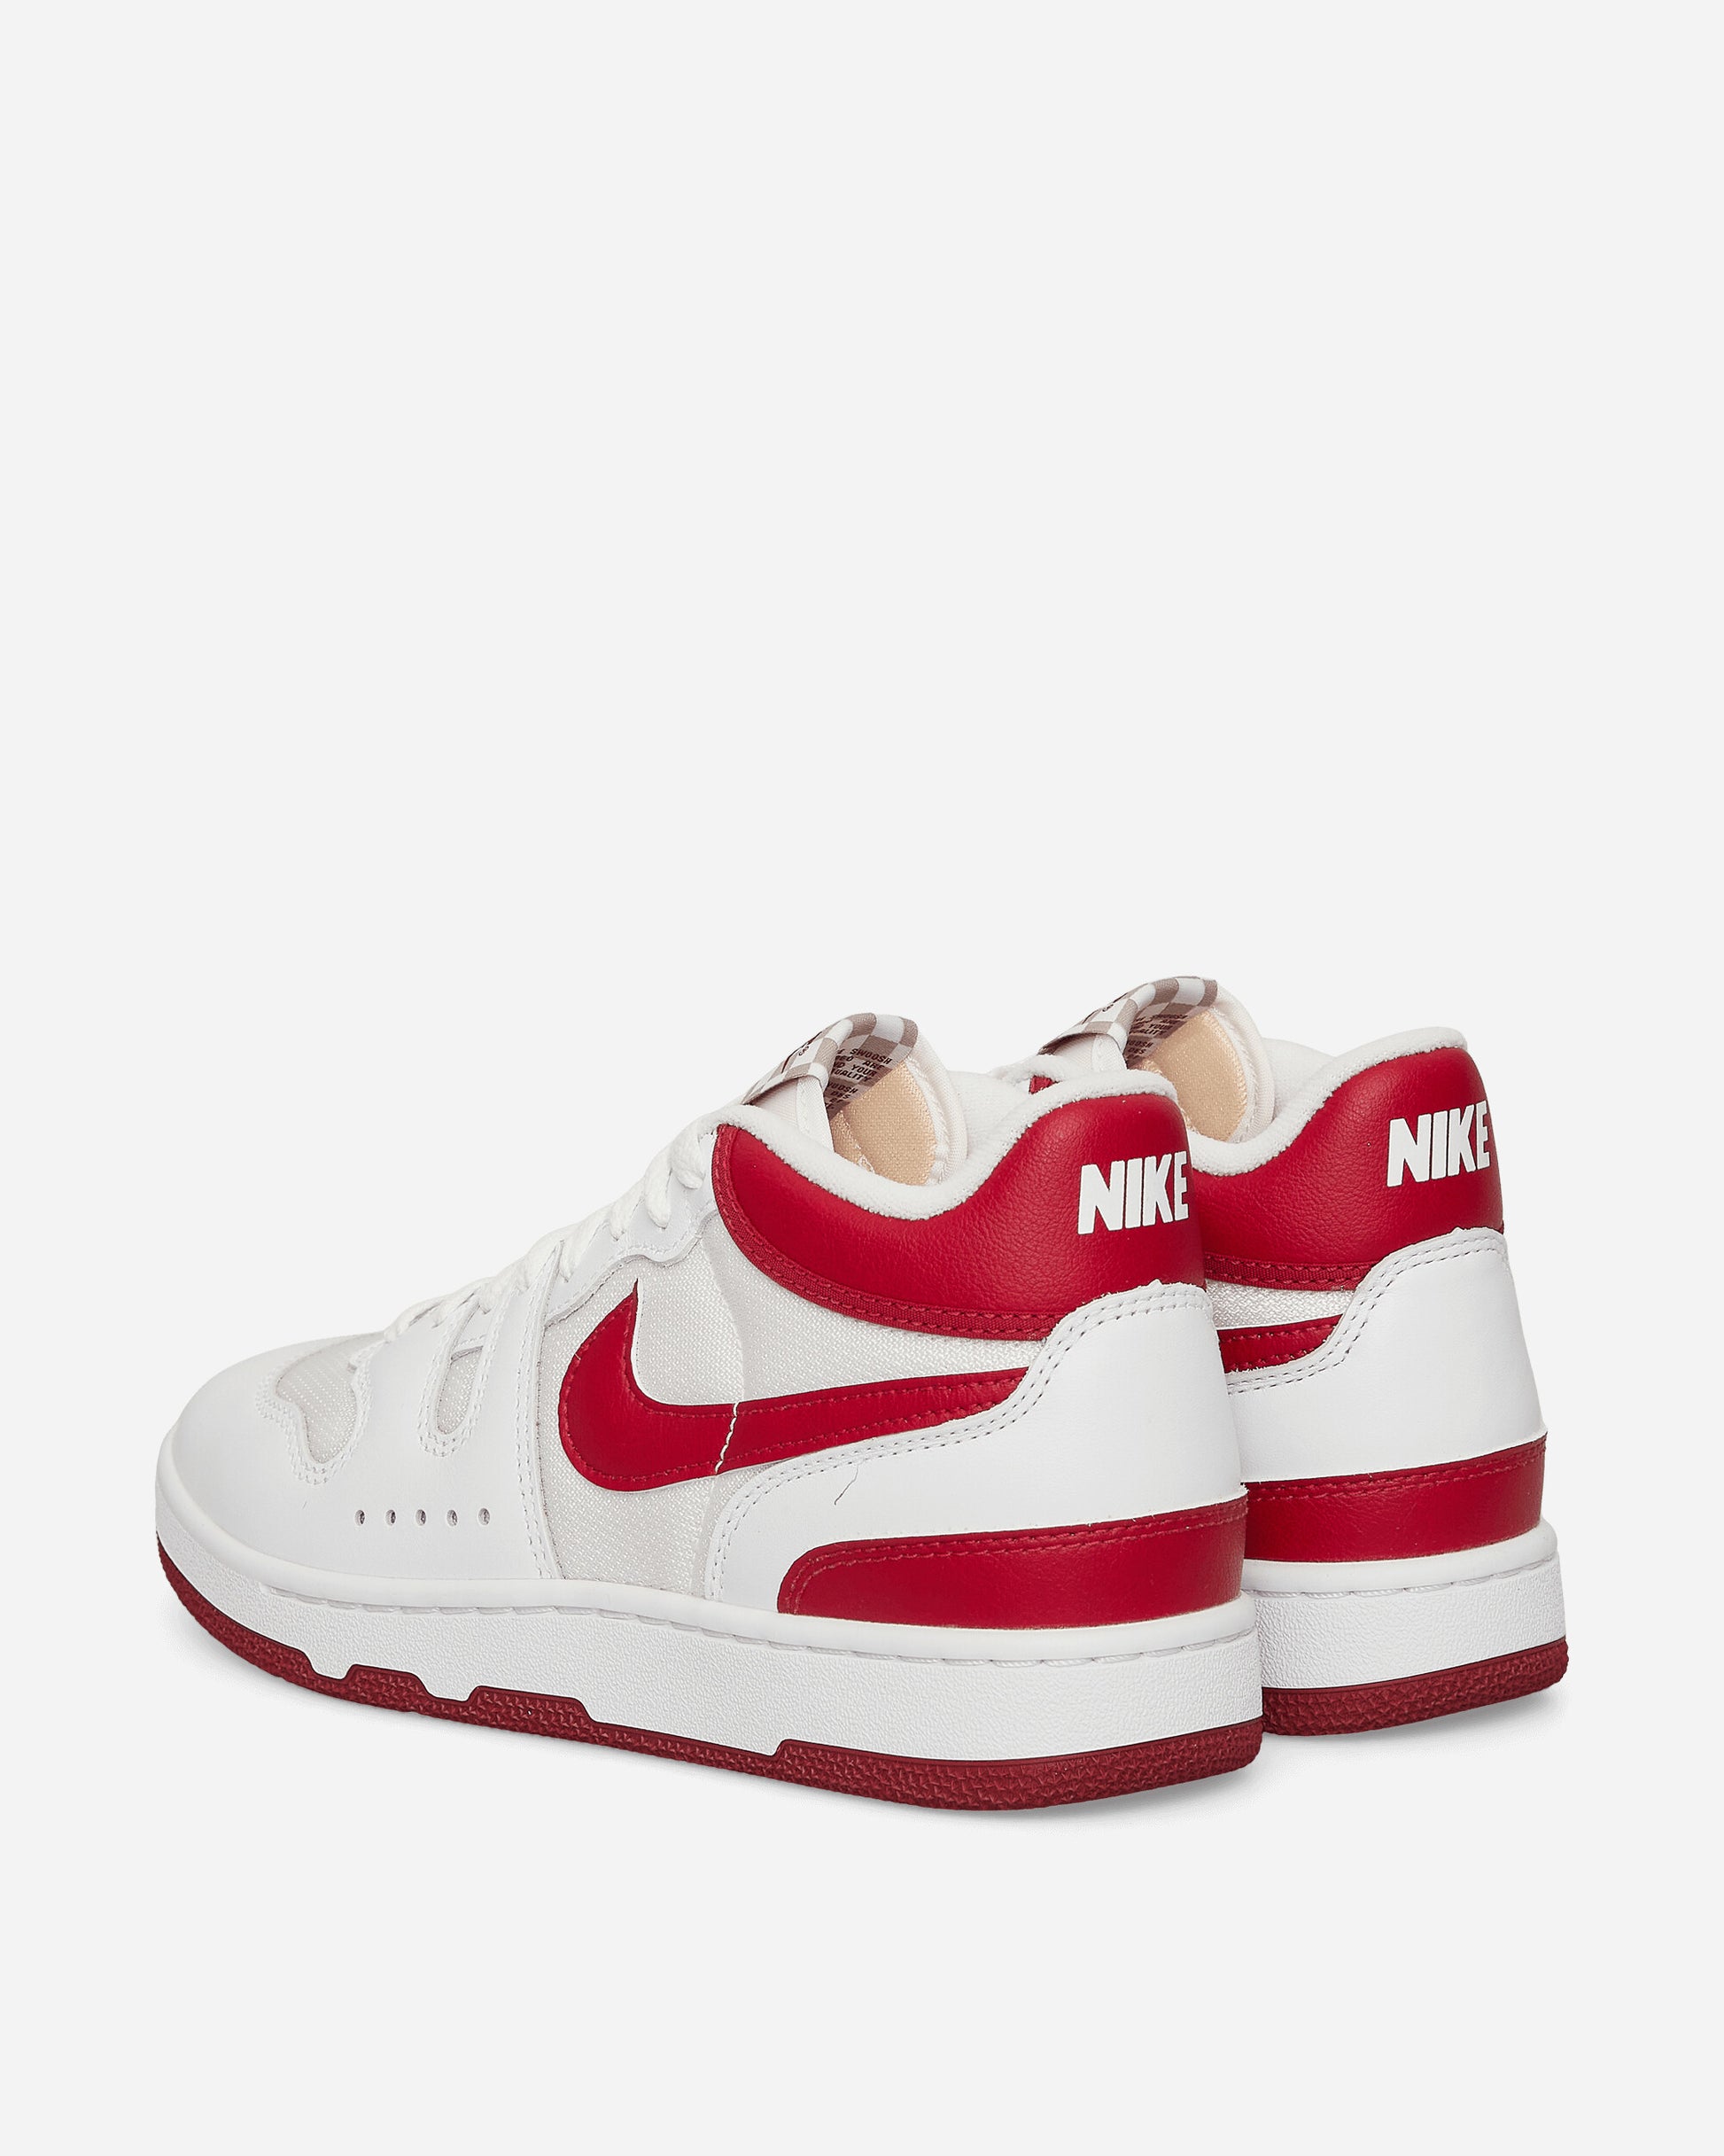 Nike Nike Attack Qs Sp White/Red Crush/White Sneakers High FB8938-100